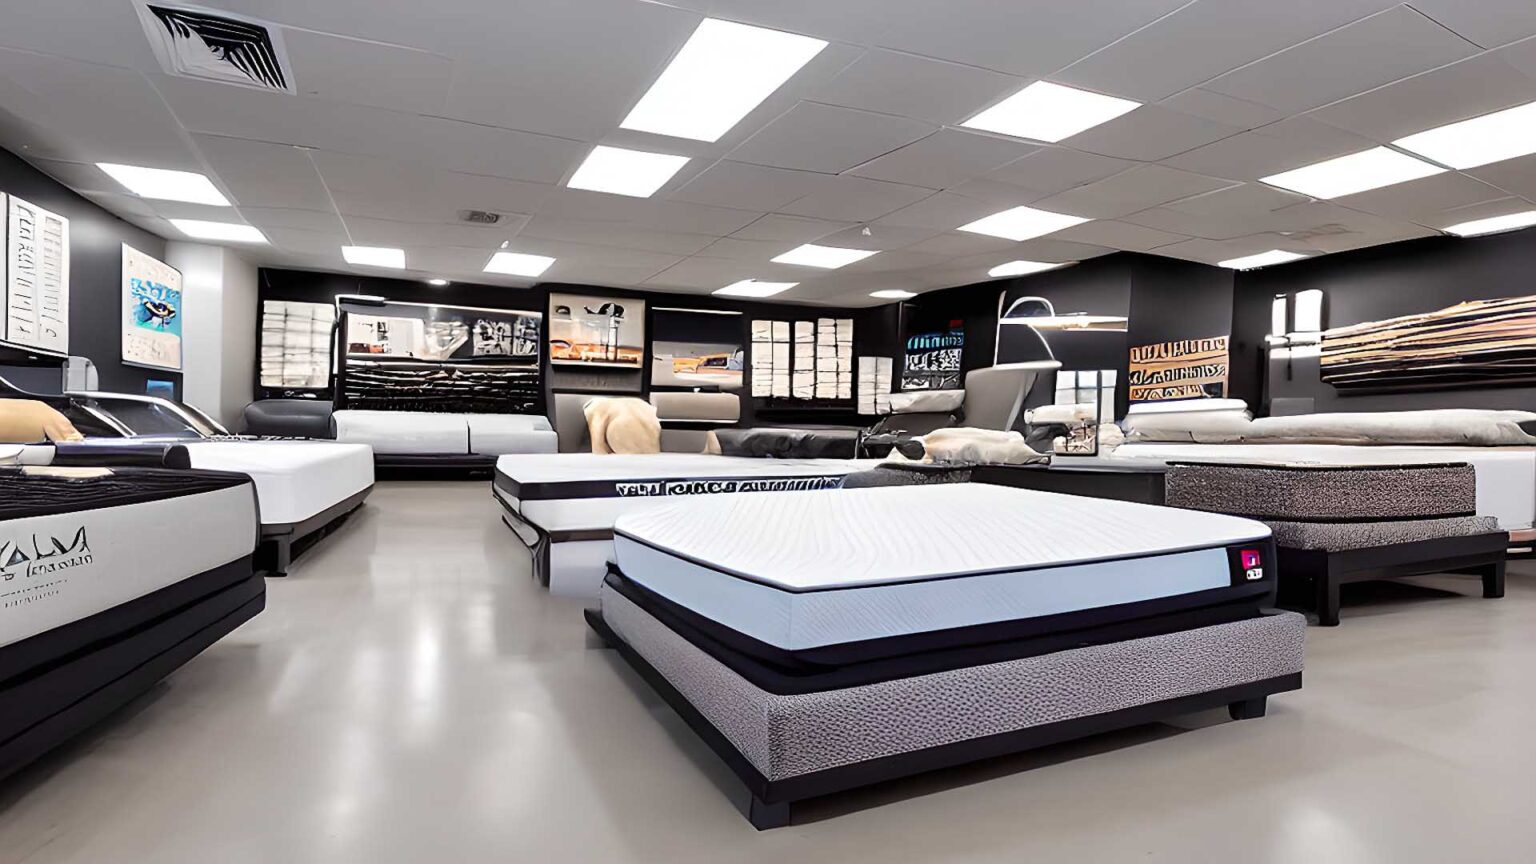 Mattress Stores, mattress dealers, and mattress retailers near me in Fort Collins, CO